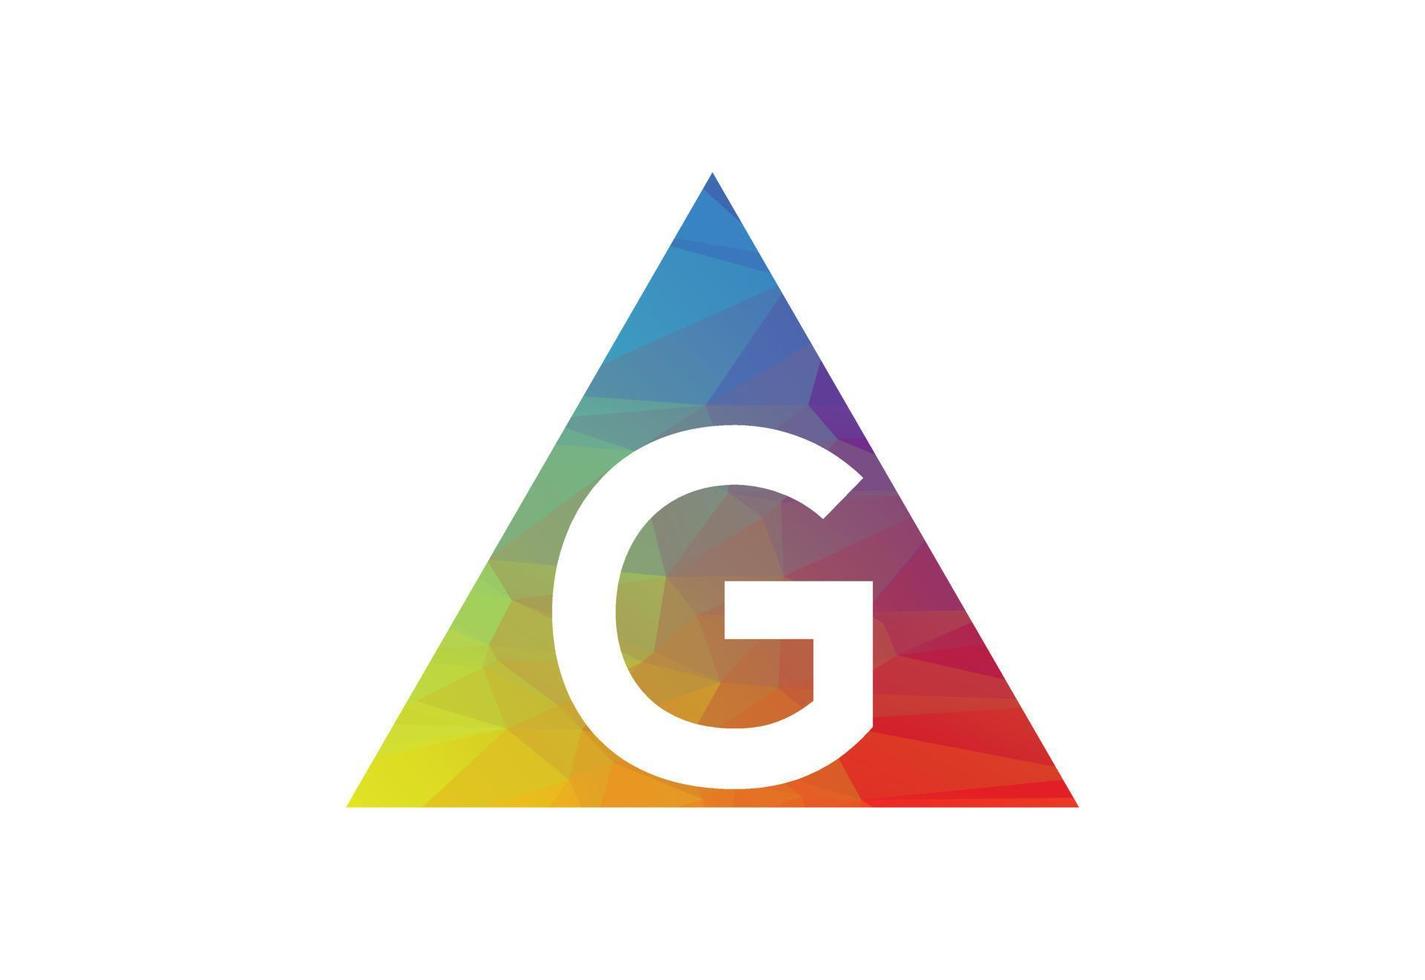 Colourful Low Poly and initial G letter logo design, Vector illustration